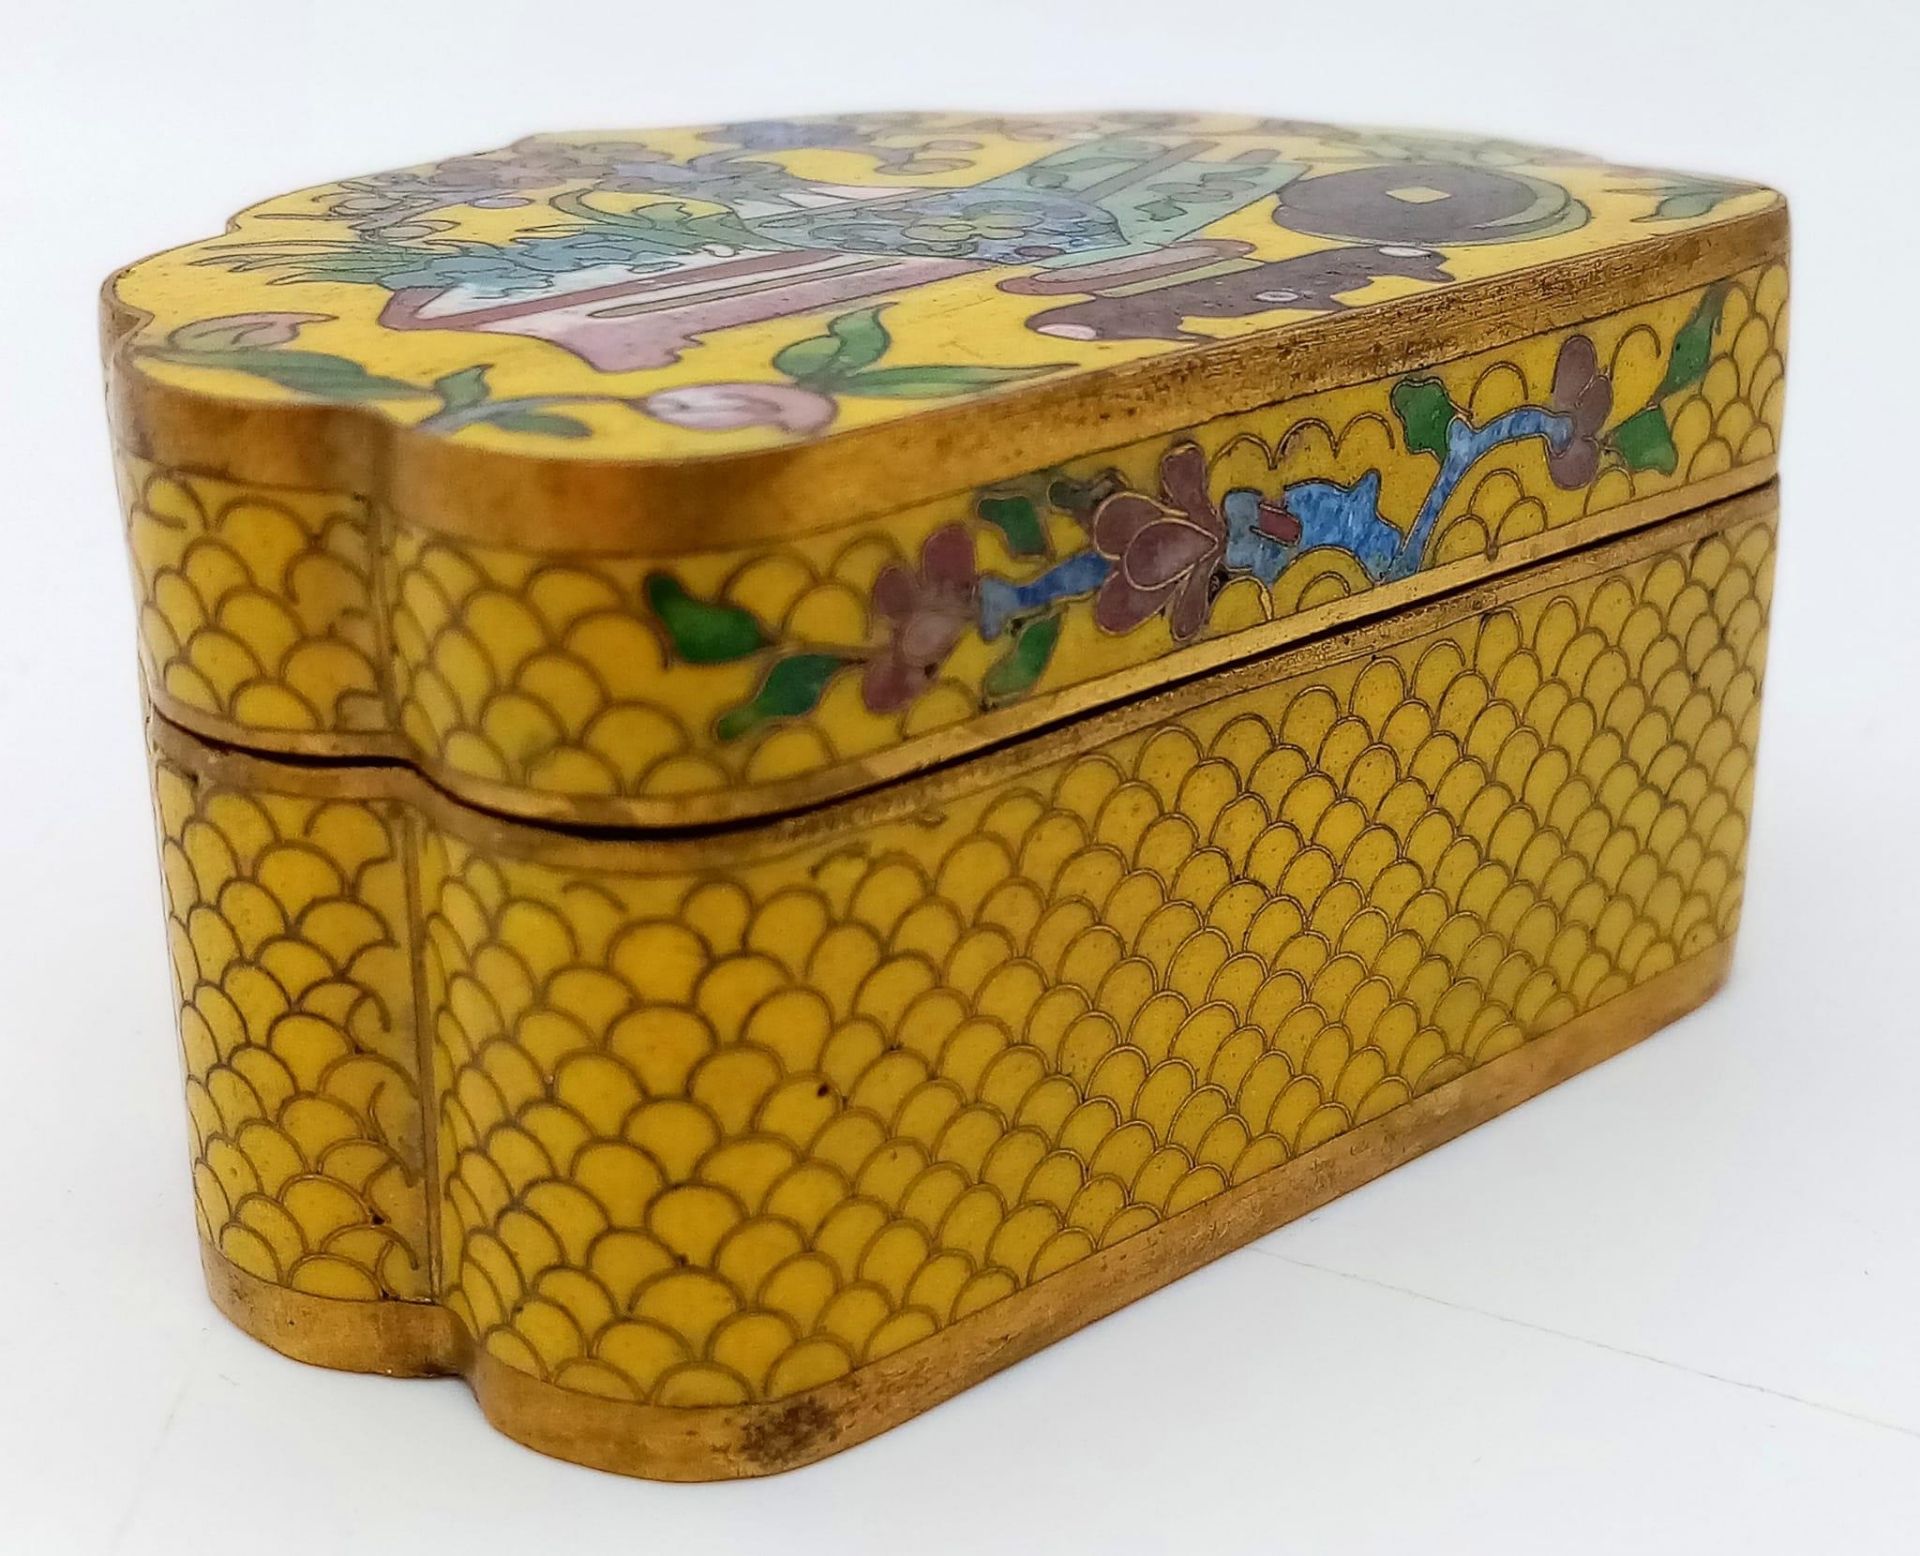 AN EXQUISITE EXAMPLE OF 19TH CENTURY CHINESE CLOISONNE WORK IN THE FORM OF A SMALL TRINKET BOX . - Image 3 of 5